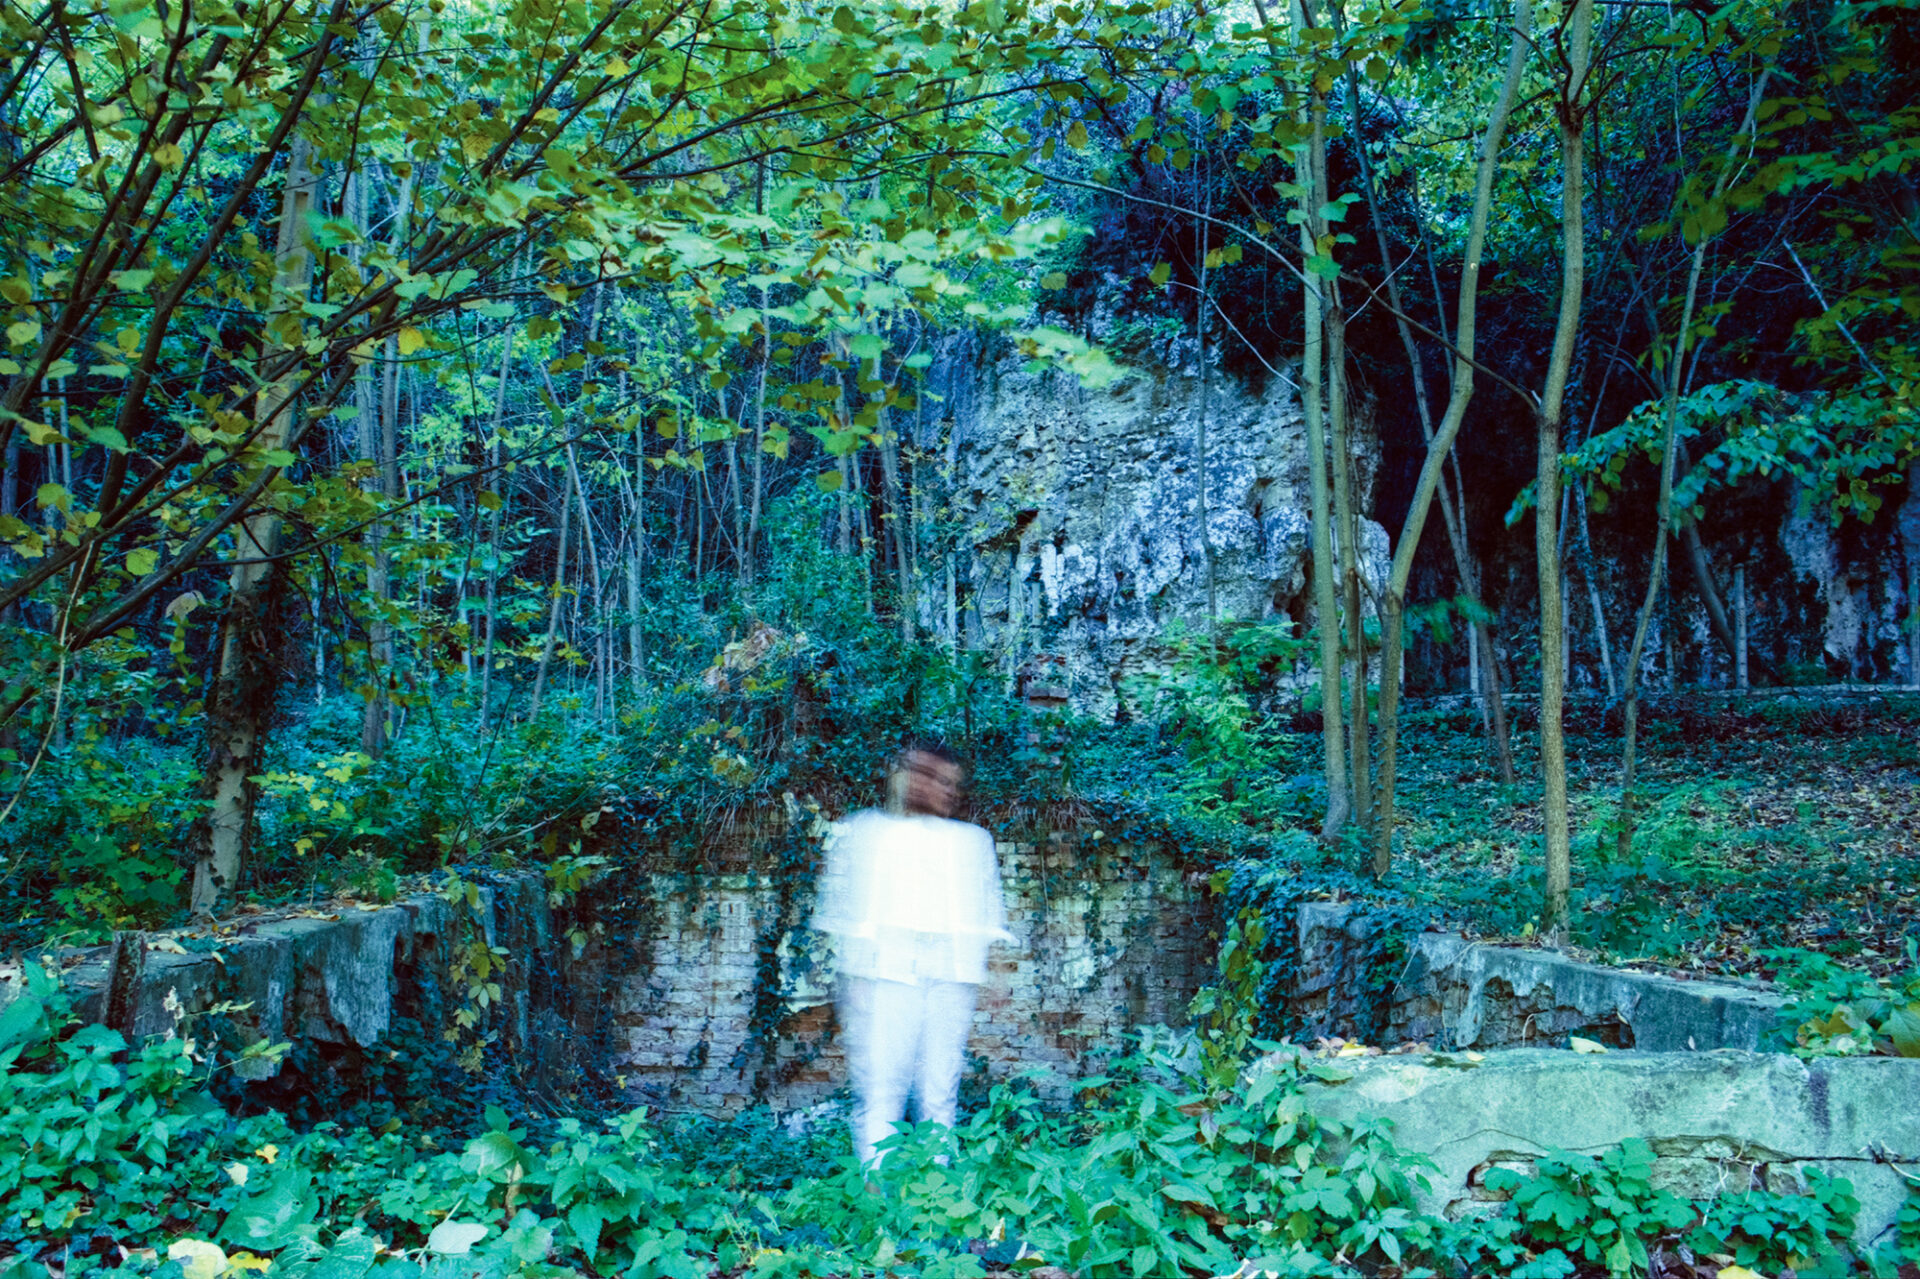 Bodies By Viktoria Raykova. This picture depicts a blurred woman standing in a forest.